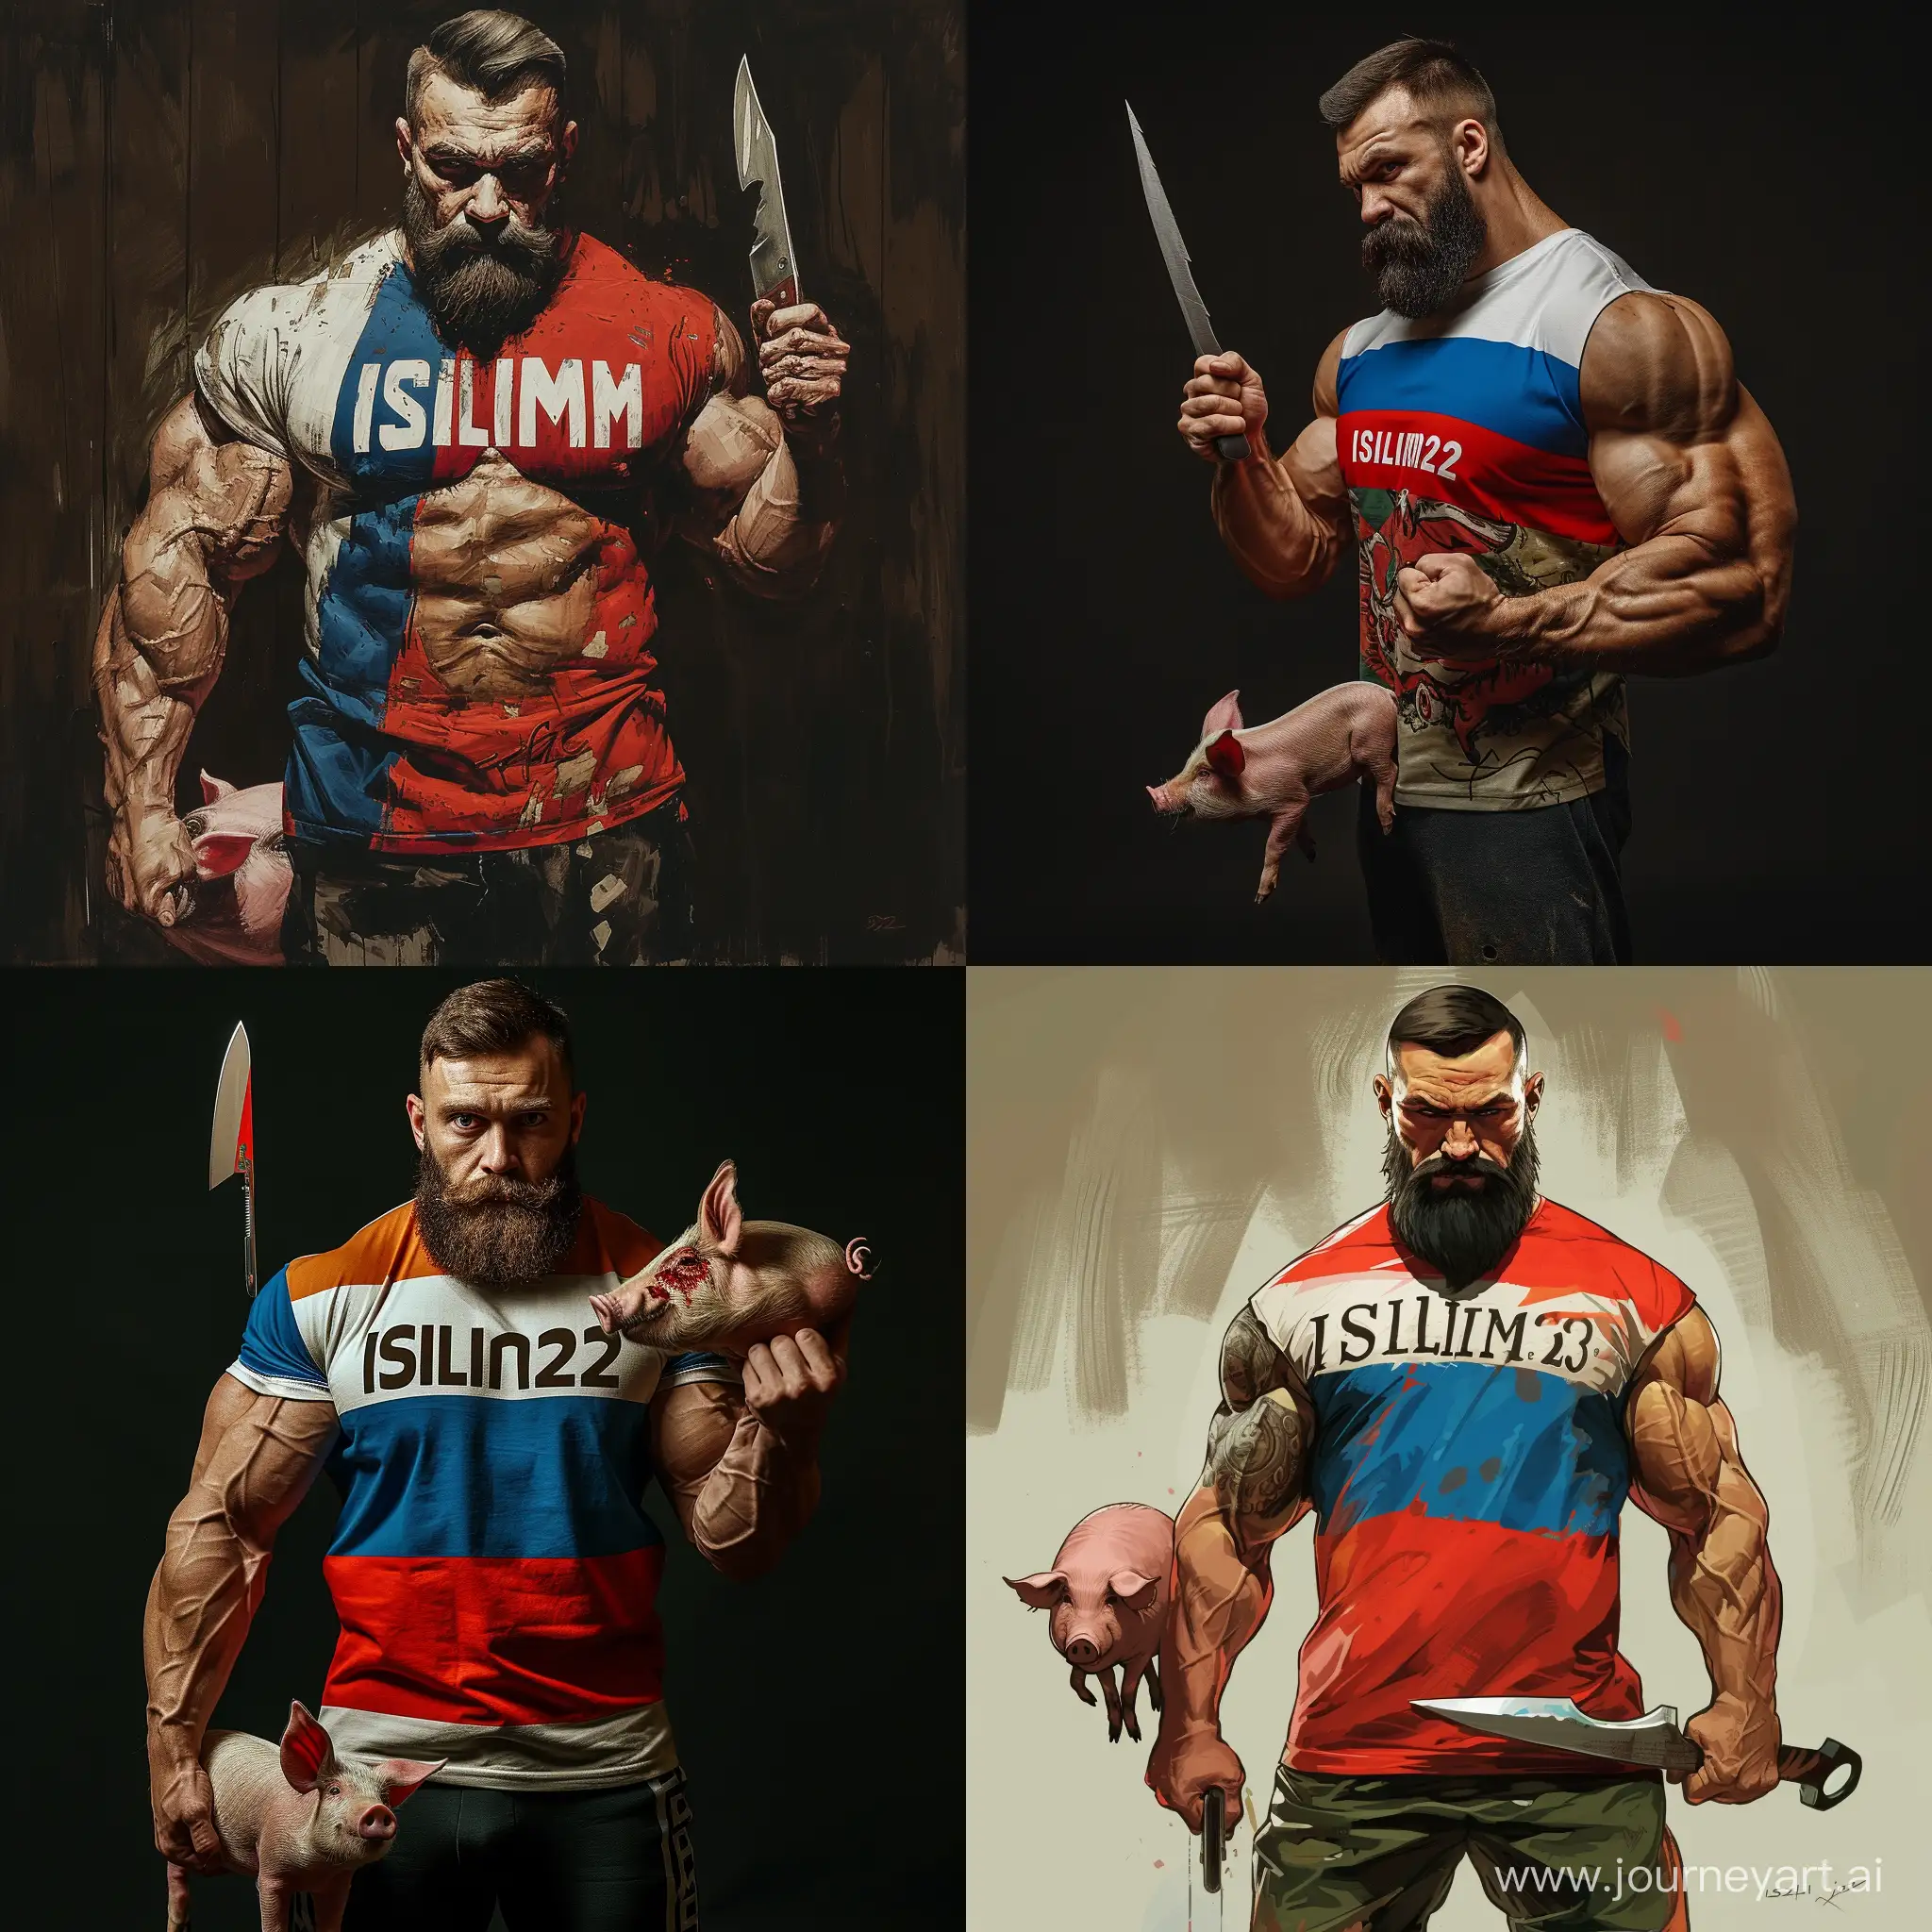 Russian-FlagInspired-Bodybuilder-with-ISLIM32-Shirt-and-Pig-Holding-a-Knife